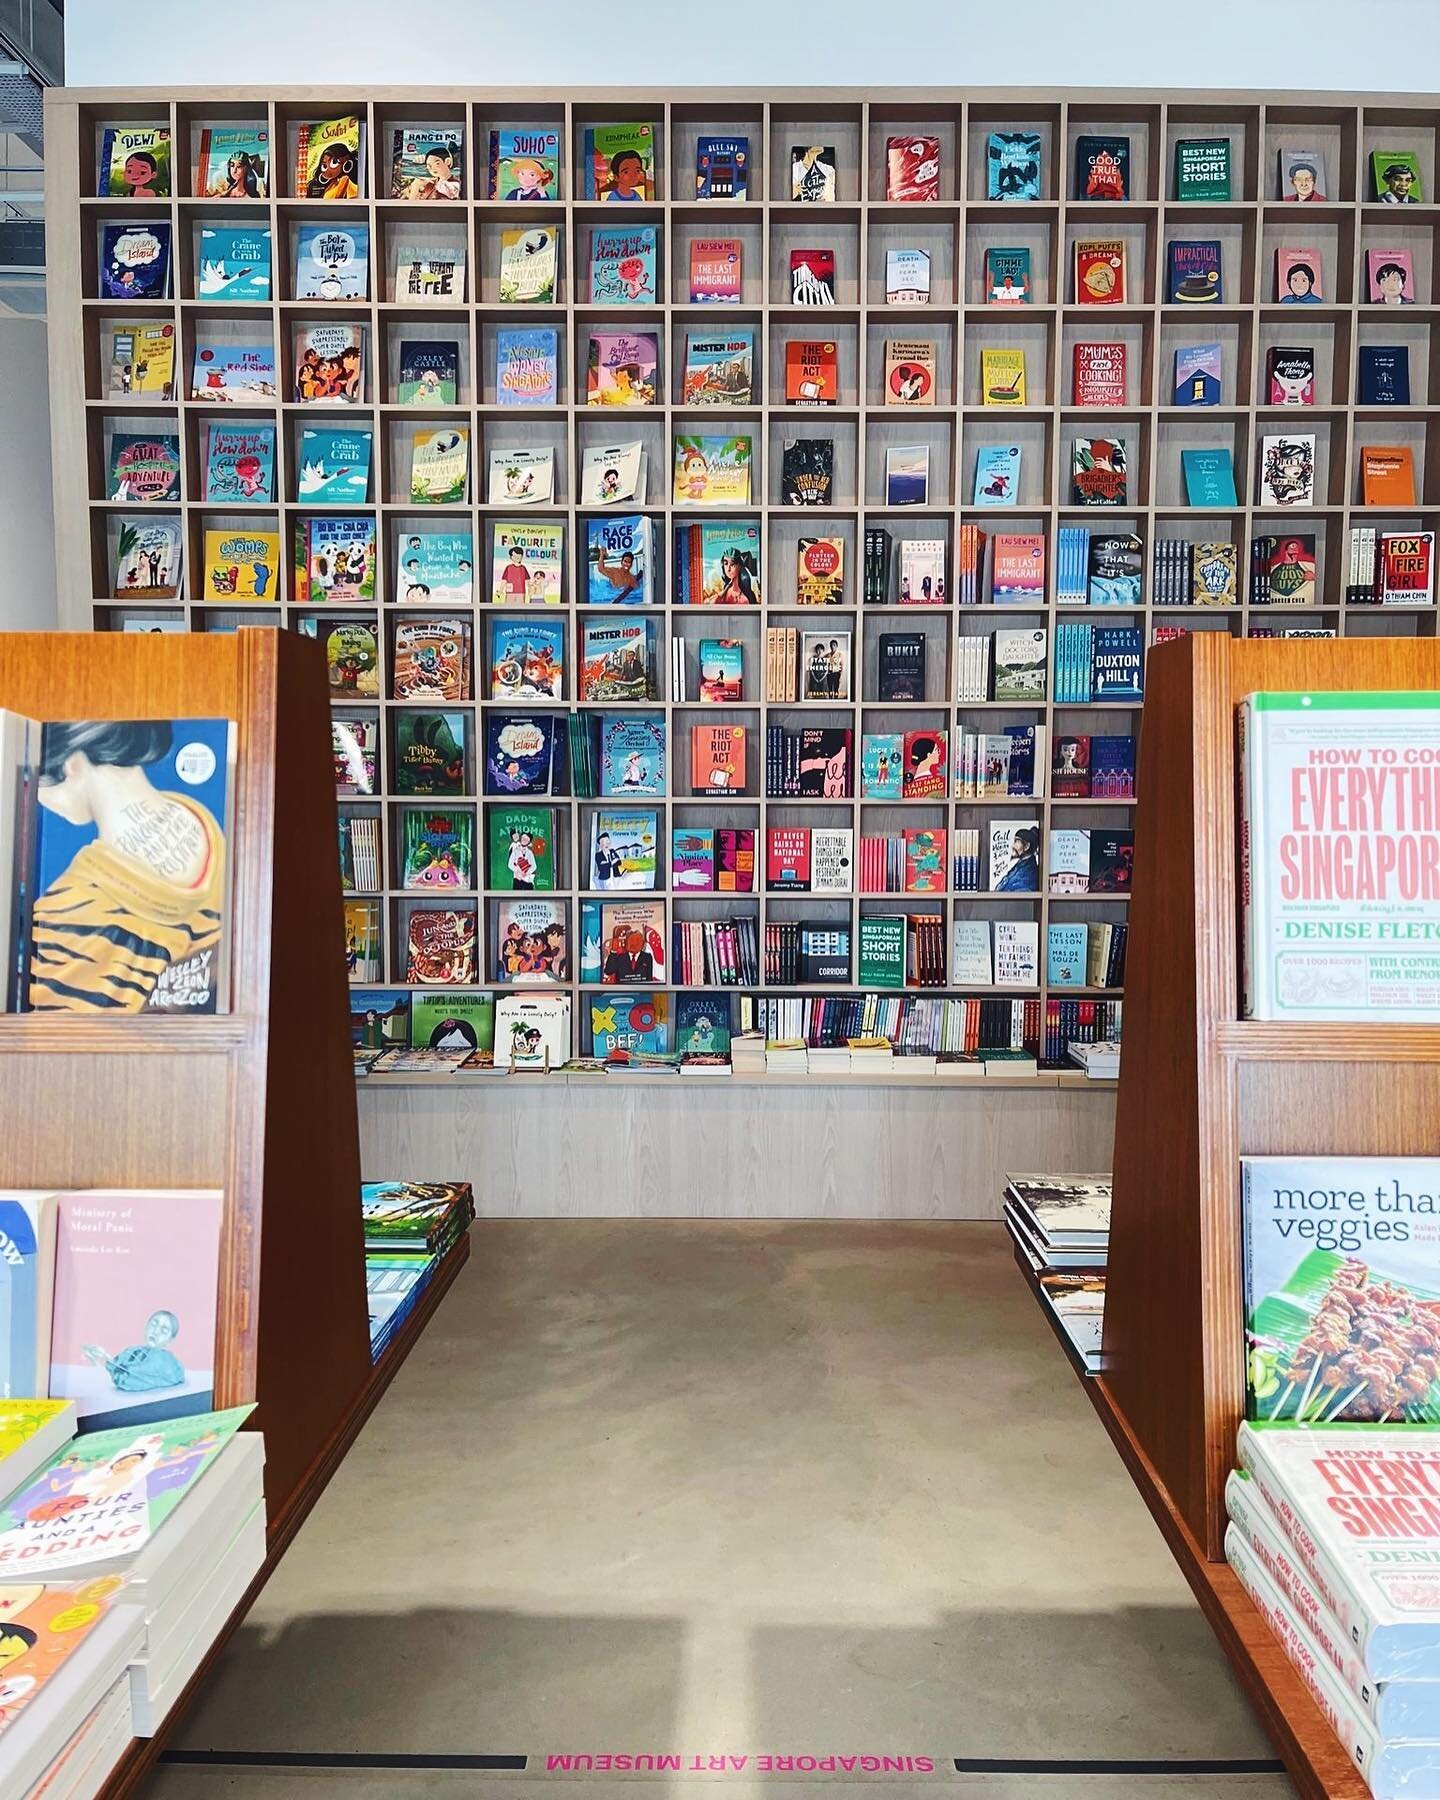 👀👀 Spot us on the shelves of @epigrambookshop at Singapore Art Museum. 
Swipe 👉🏼 to reveal answer! 

Browse, touch, smell or purchase a copy of #dontmindifiask if you&rsquo;re heading down to Tanjong Pagar District to see Natasha @sgbiennale. 

F